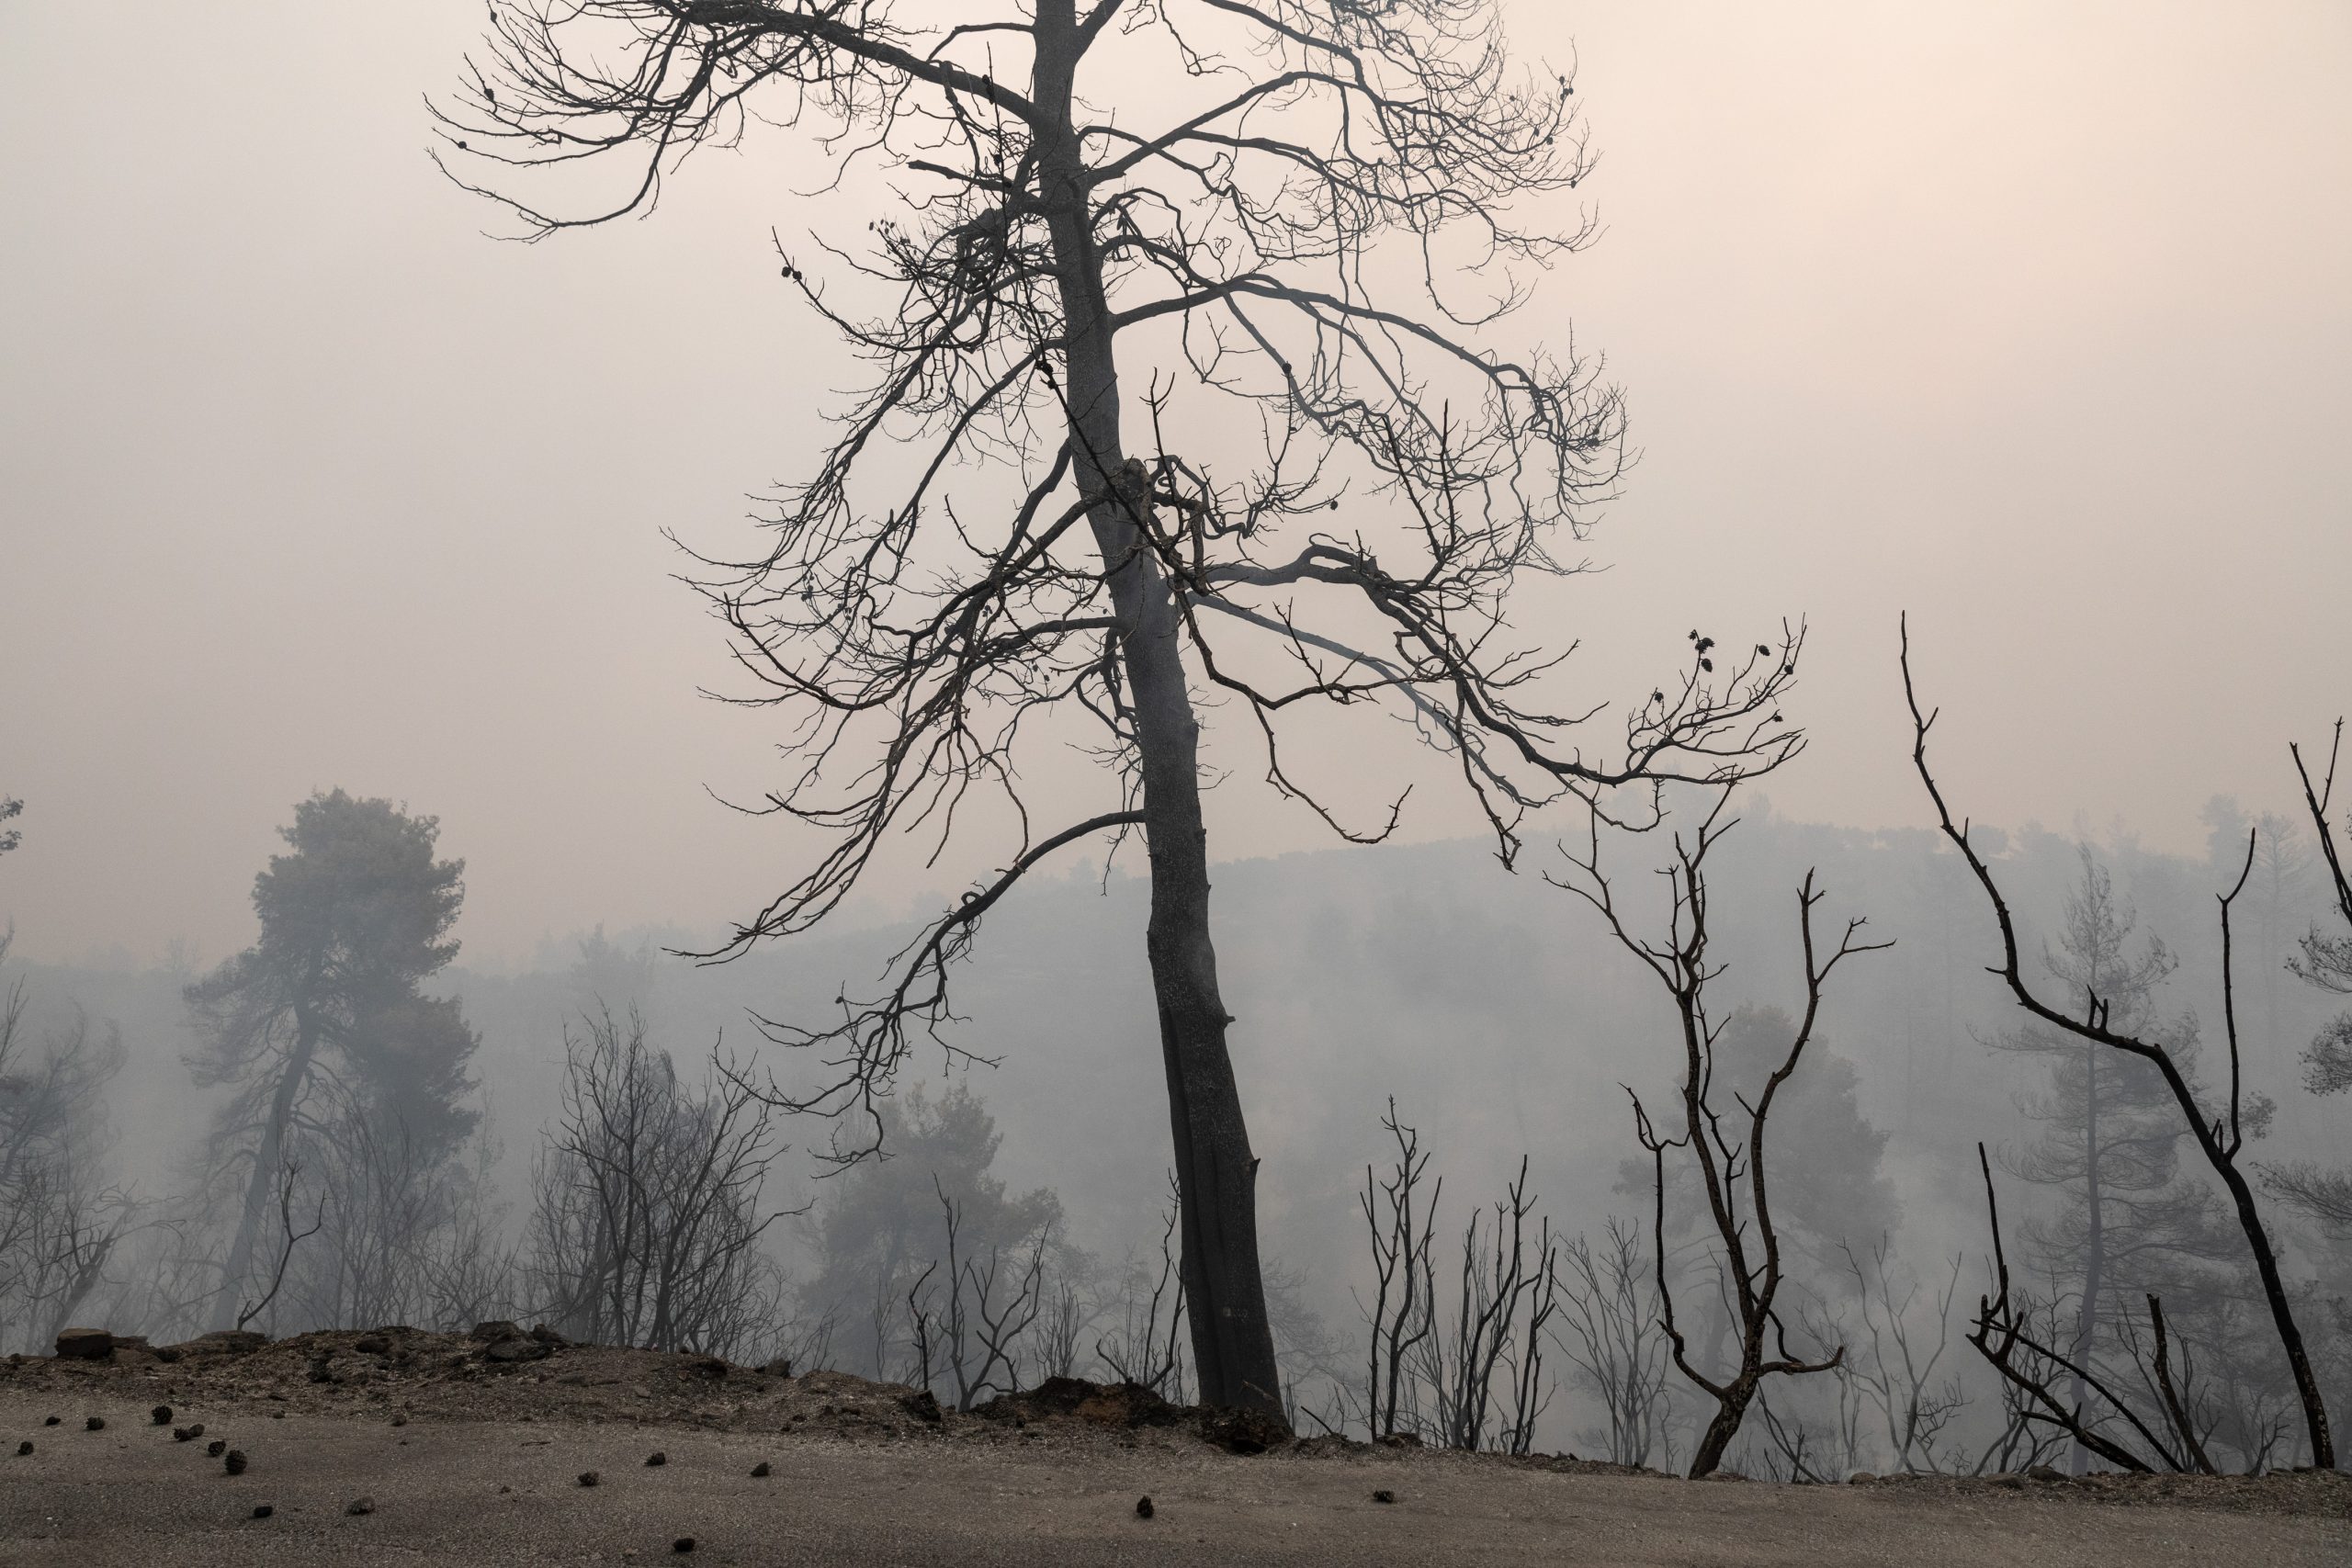 Moody’s sounds alarm over fire impact – Credit Risks from Climate Change